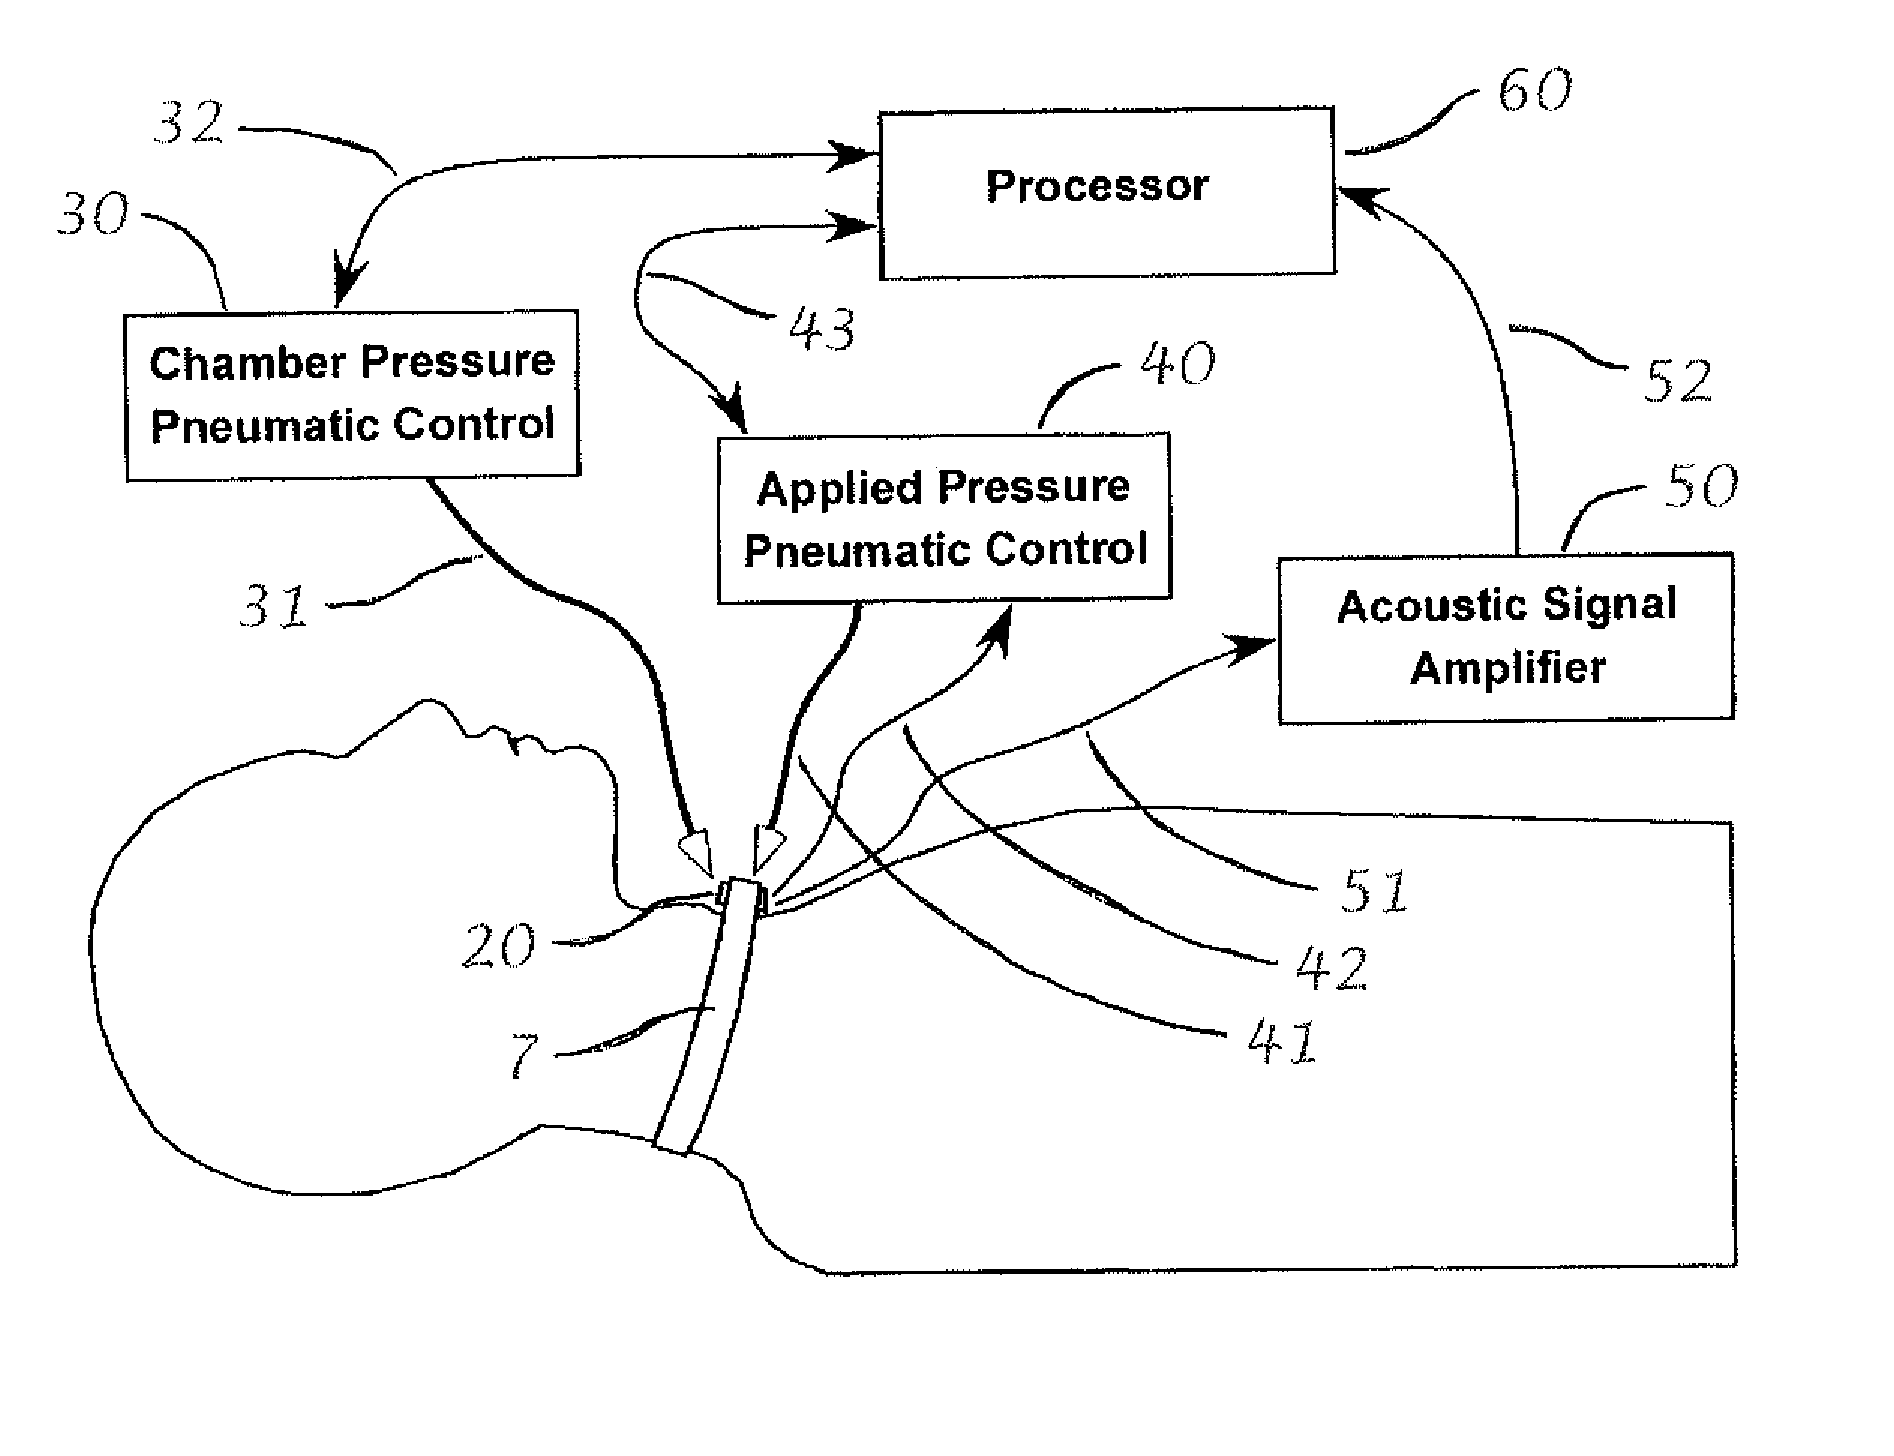 Apparatus for Acoustic Measurements of Physiological Signals with Automated Interface Controls